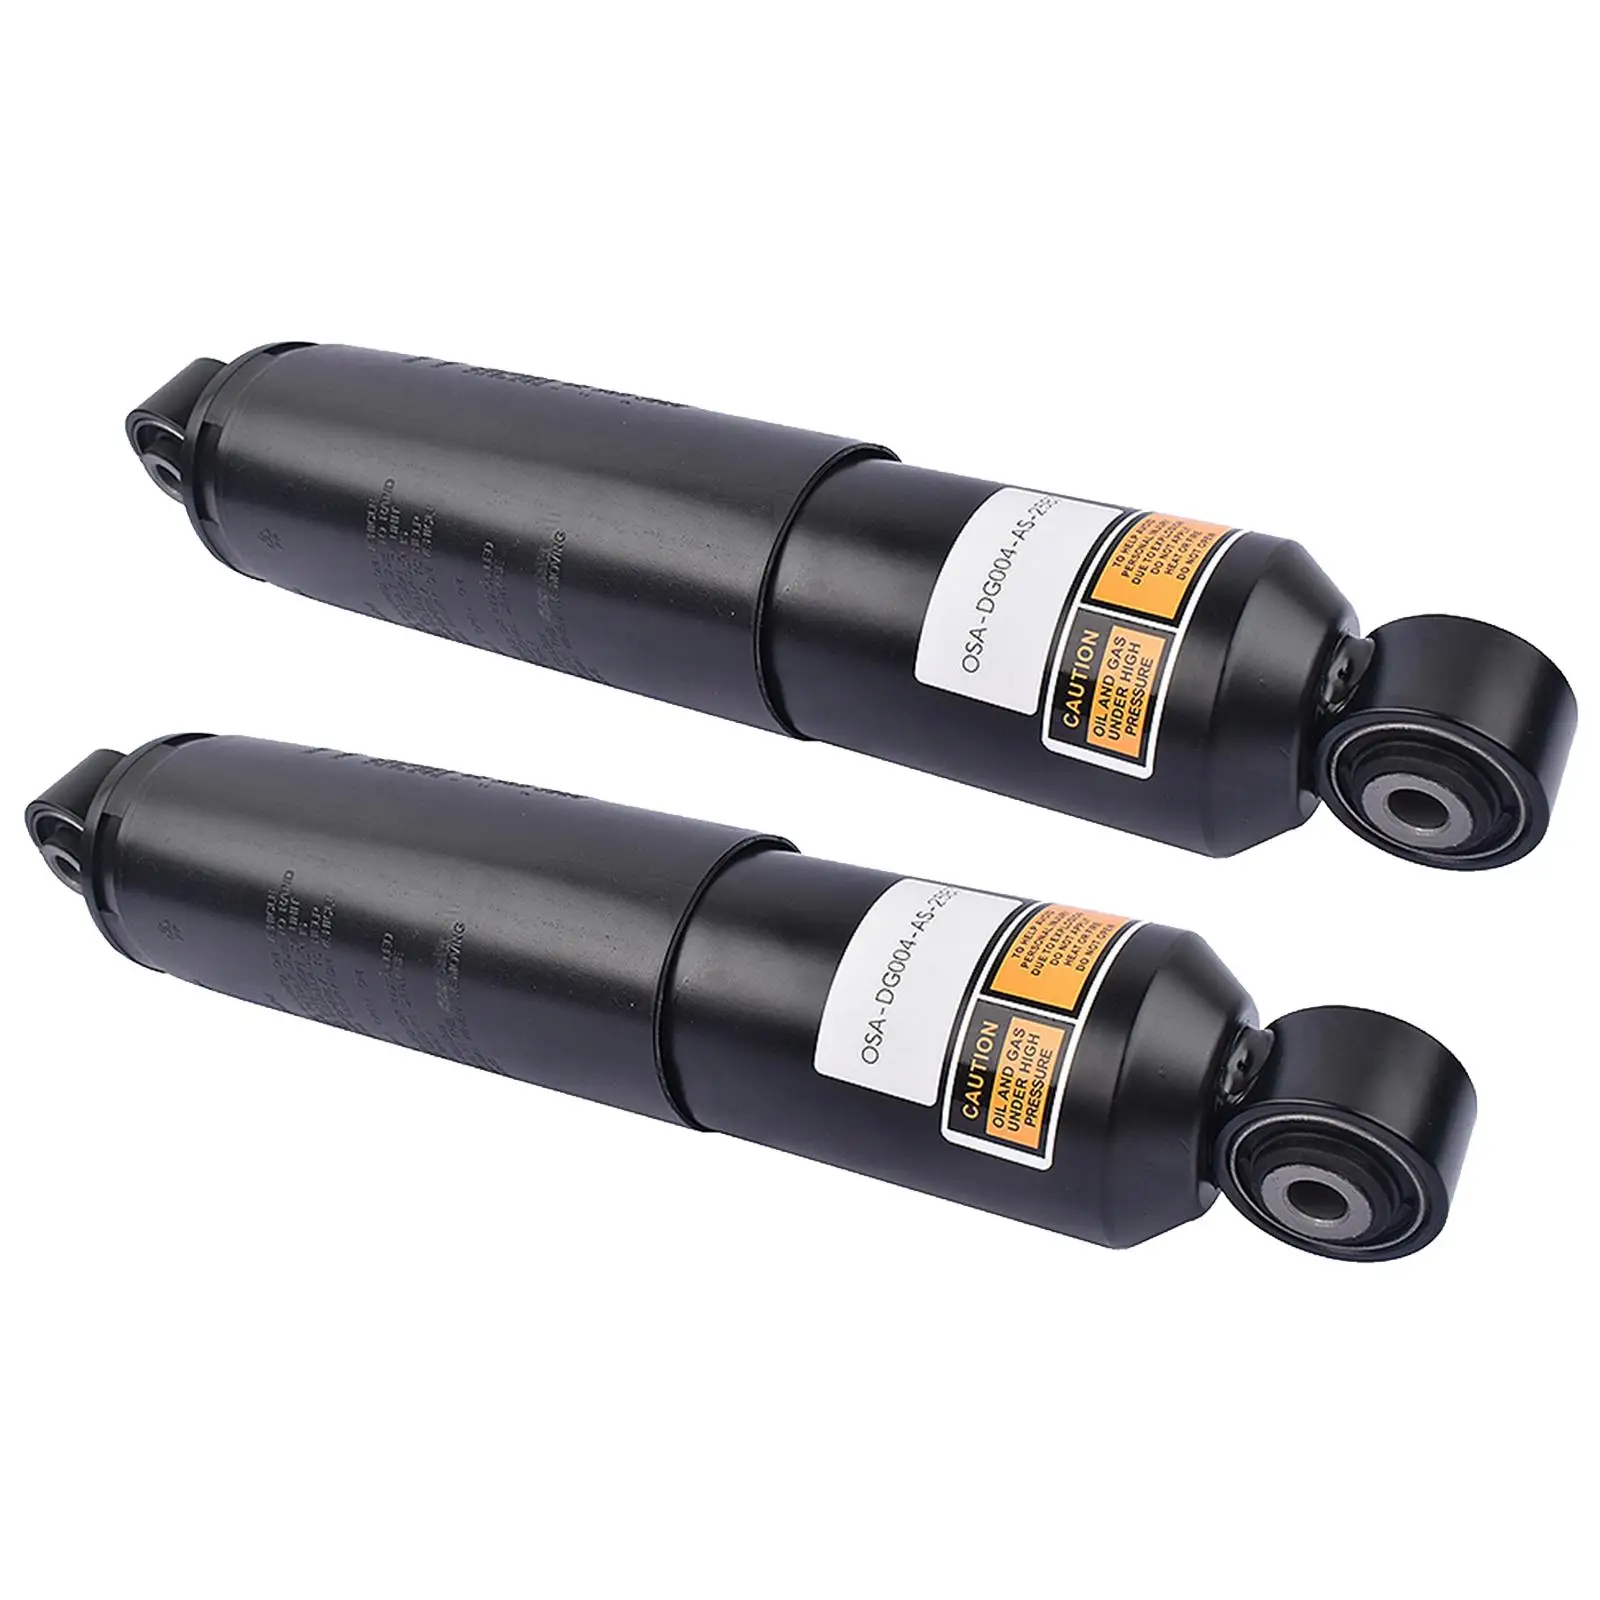 

AP01 2x Rear Shock Absorbers for Dodge Grand Caravan 12-20 Chrysler Town & Country 68144123AC 68144123AB 52830 8944104000754